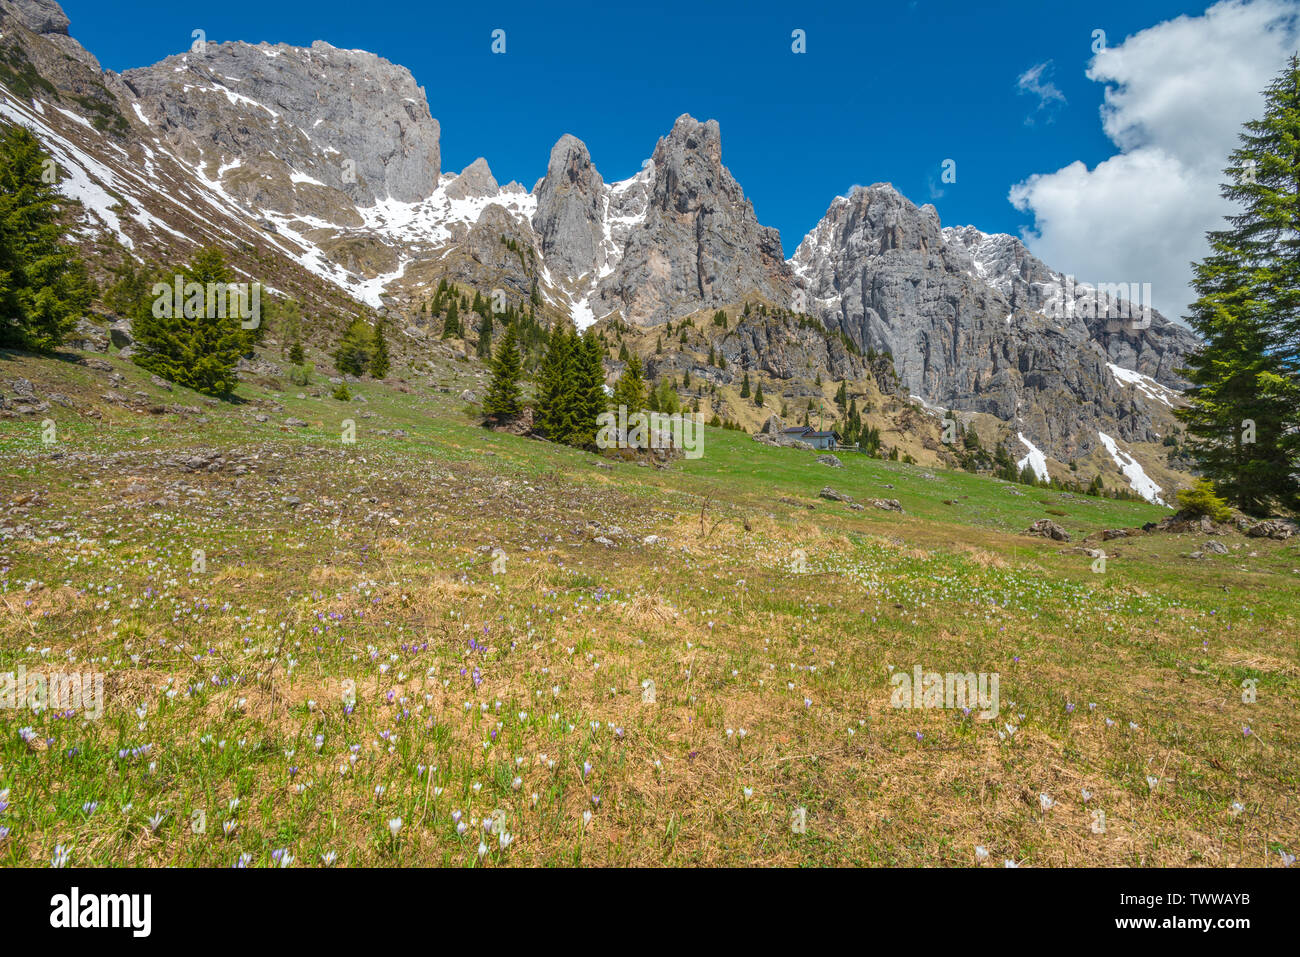 Lush alpine meadow in the Dolomites of Italy, covered in crocus flowers and surrounded by steep rocky mountains. Summer hiking in the Alps. Stock Photo